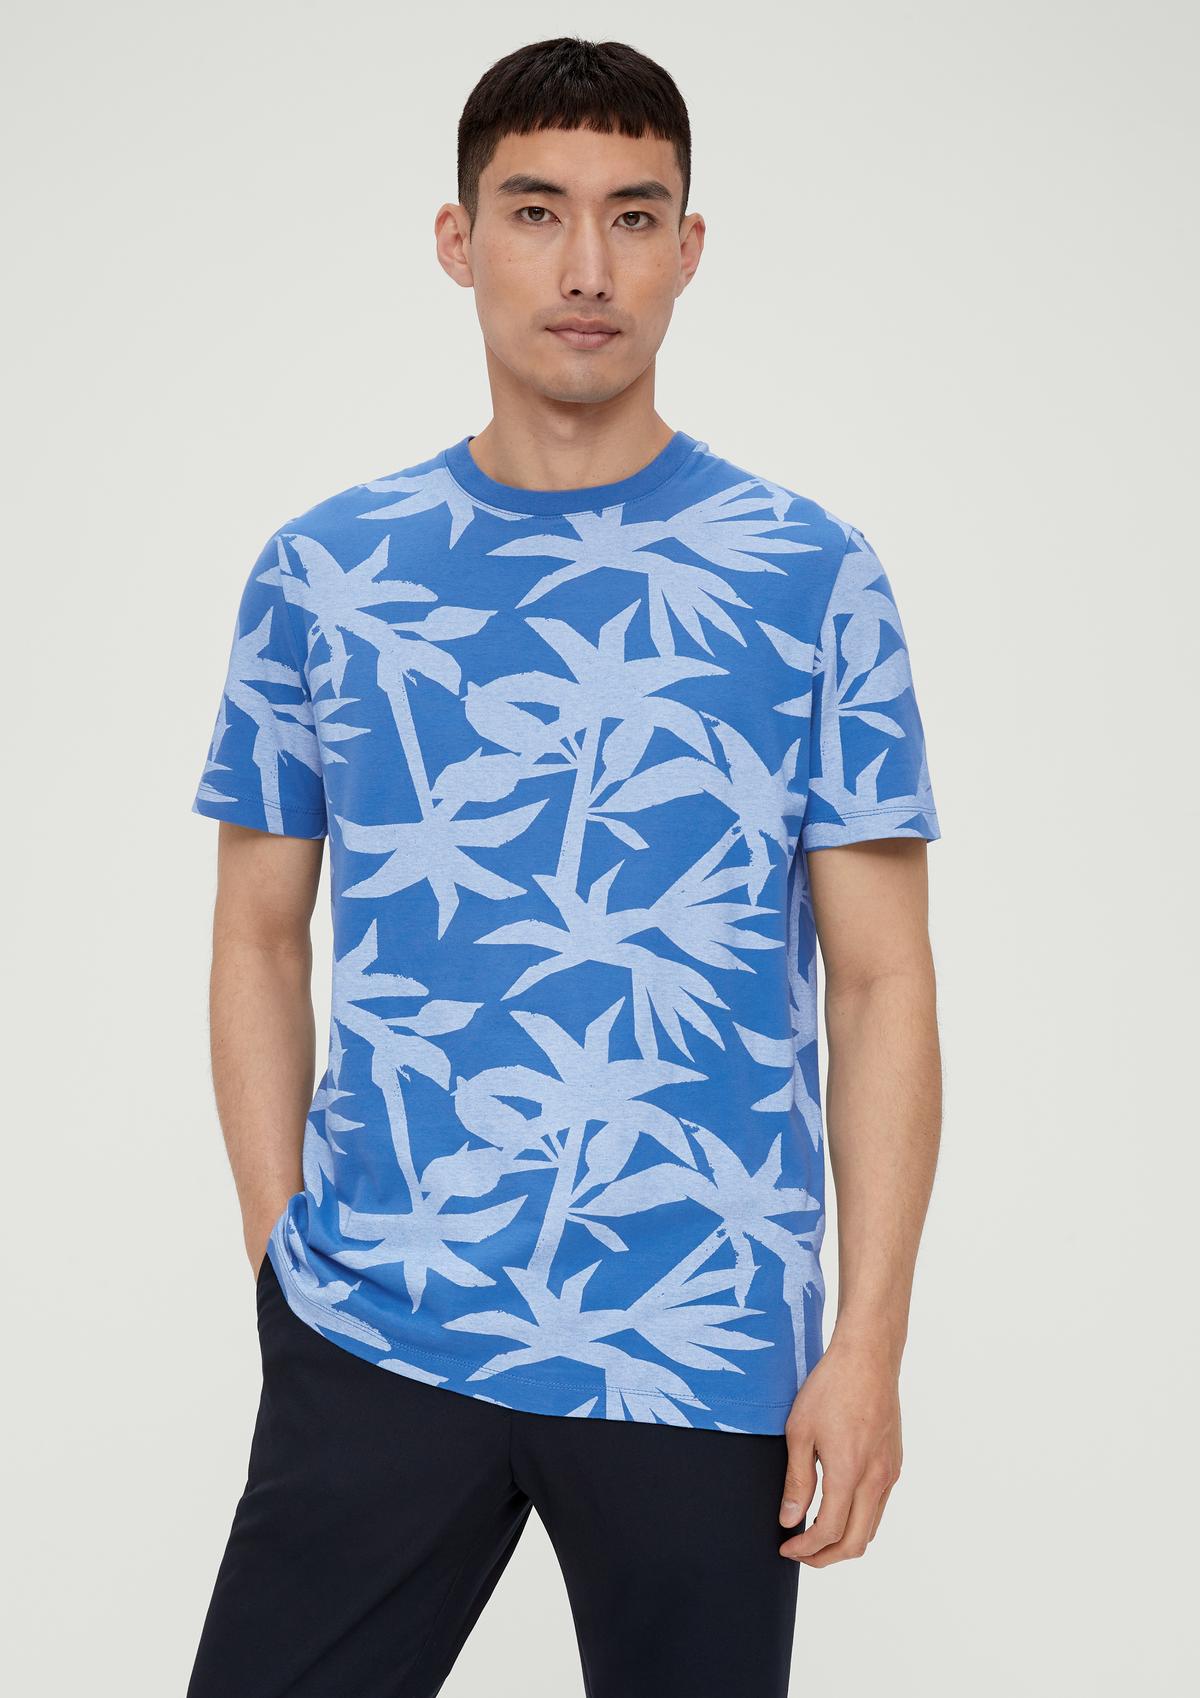 dark an print all-over - with blue T-shirt